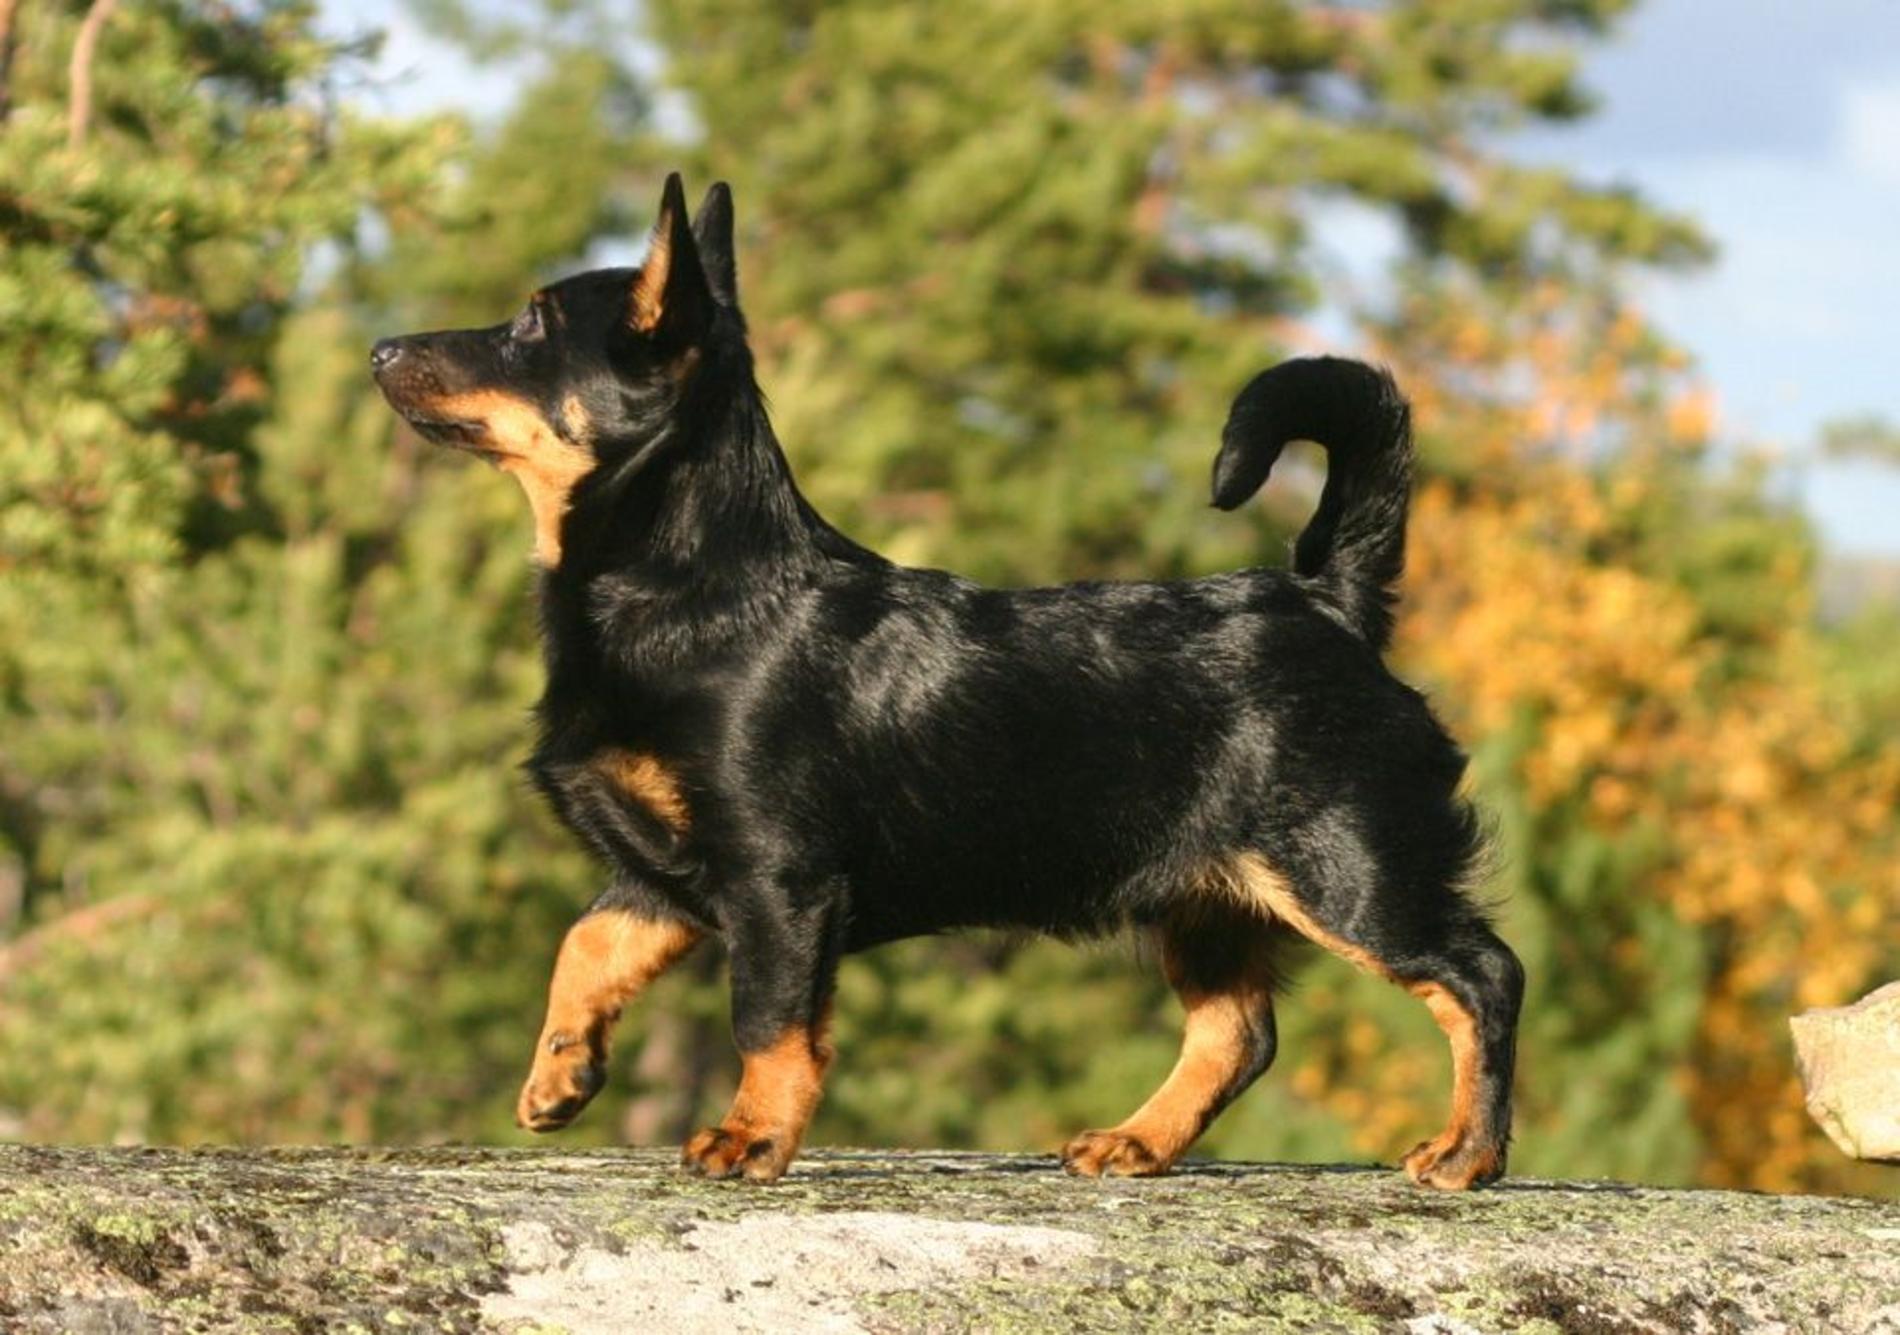 Lancashire Heeler Dog: Lancashire Lancashire Heeler Dog For A Walk Breed